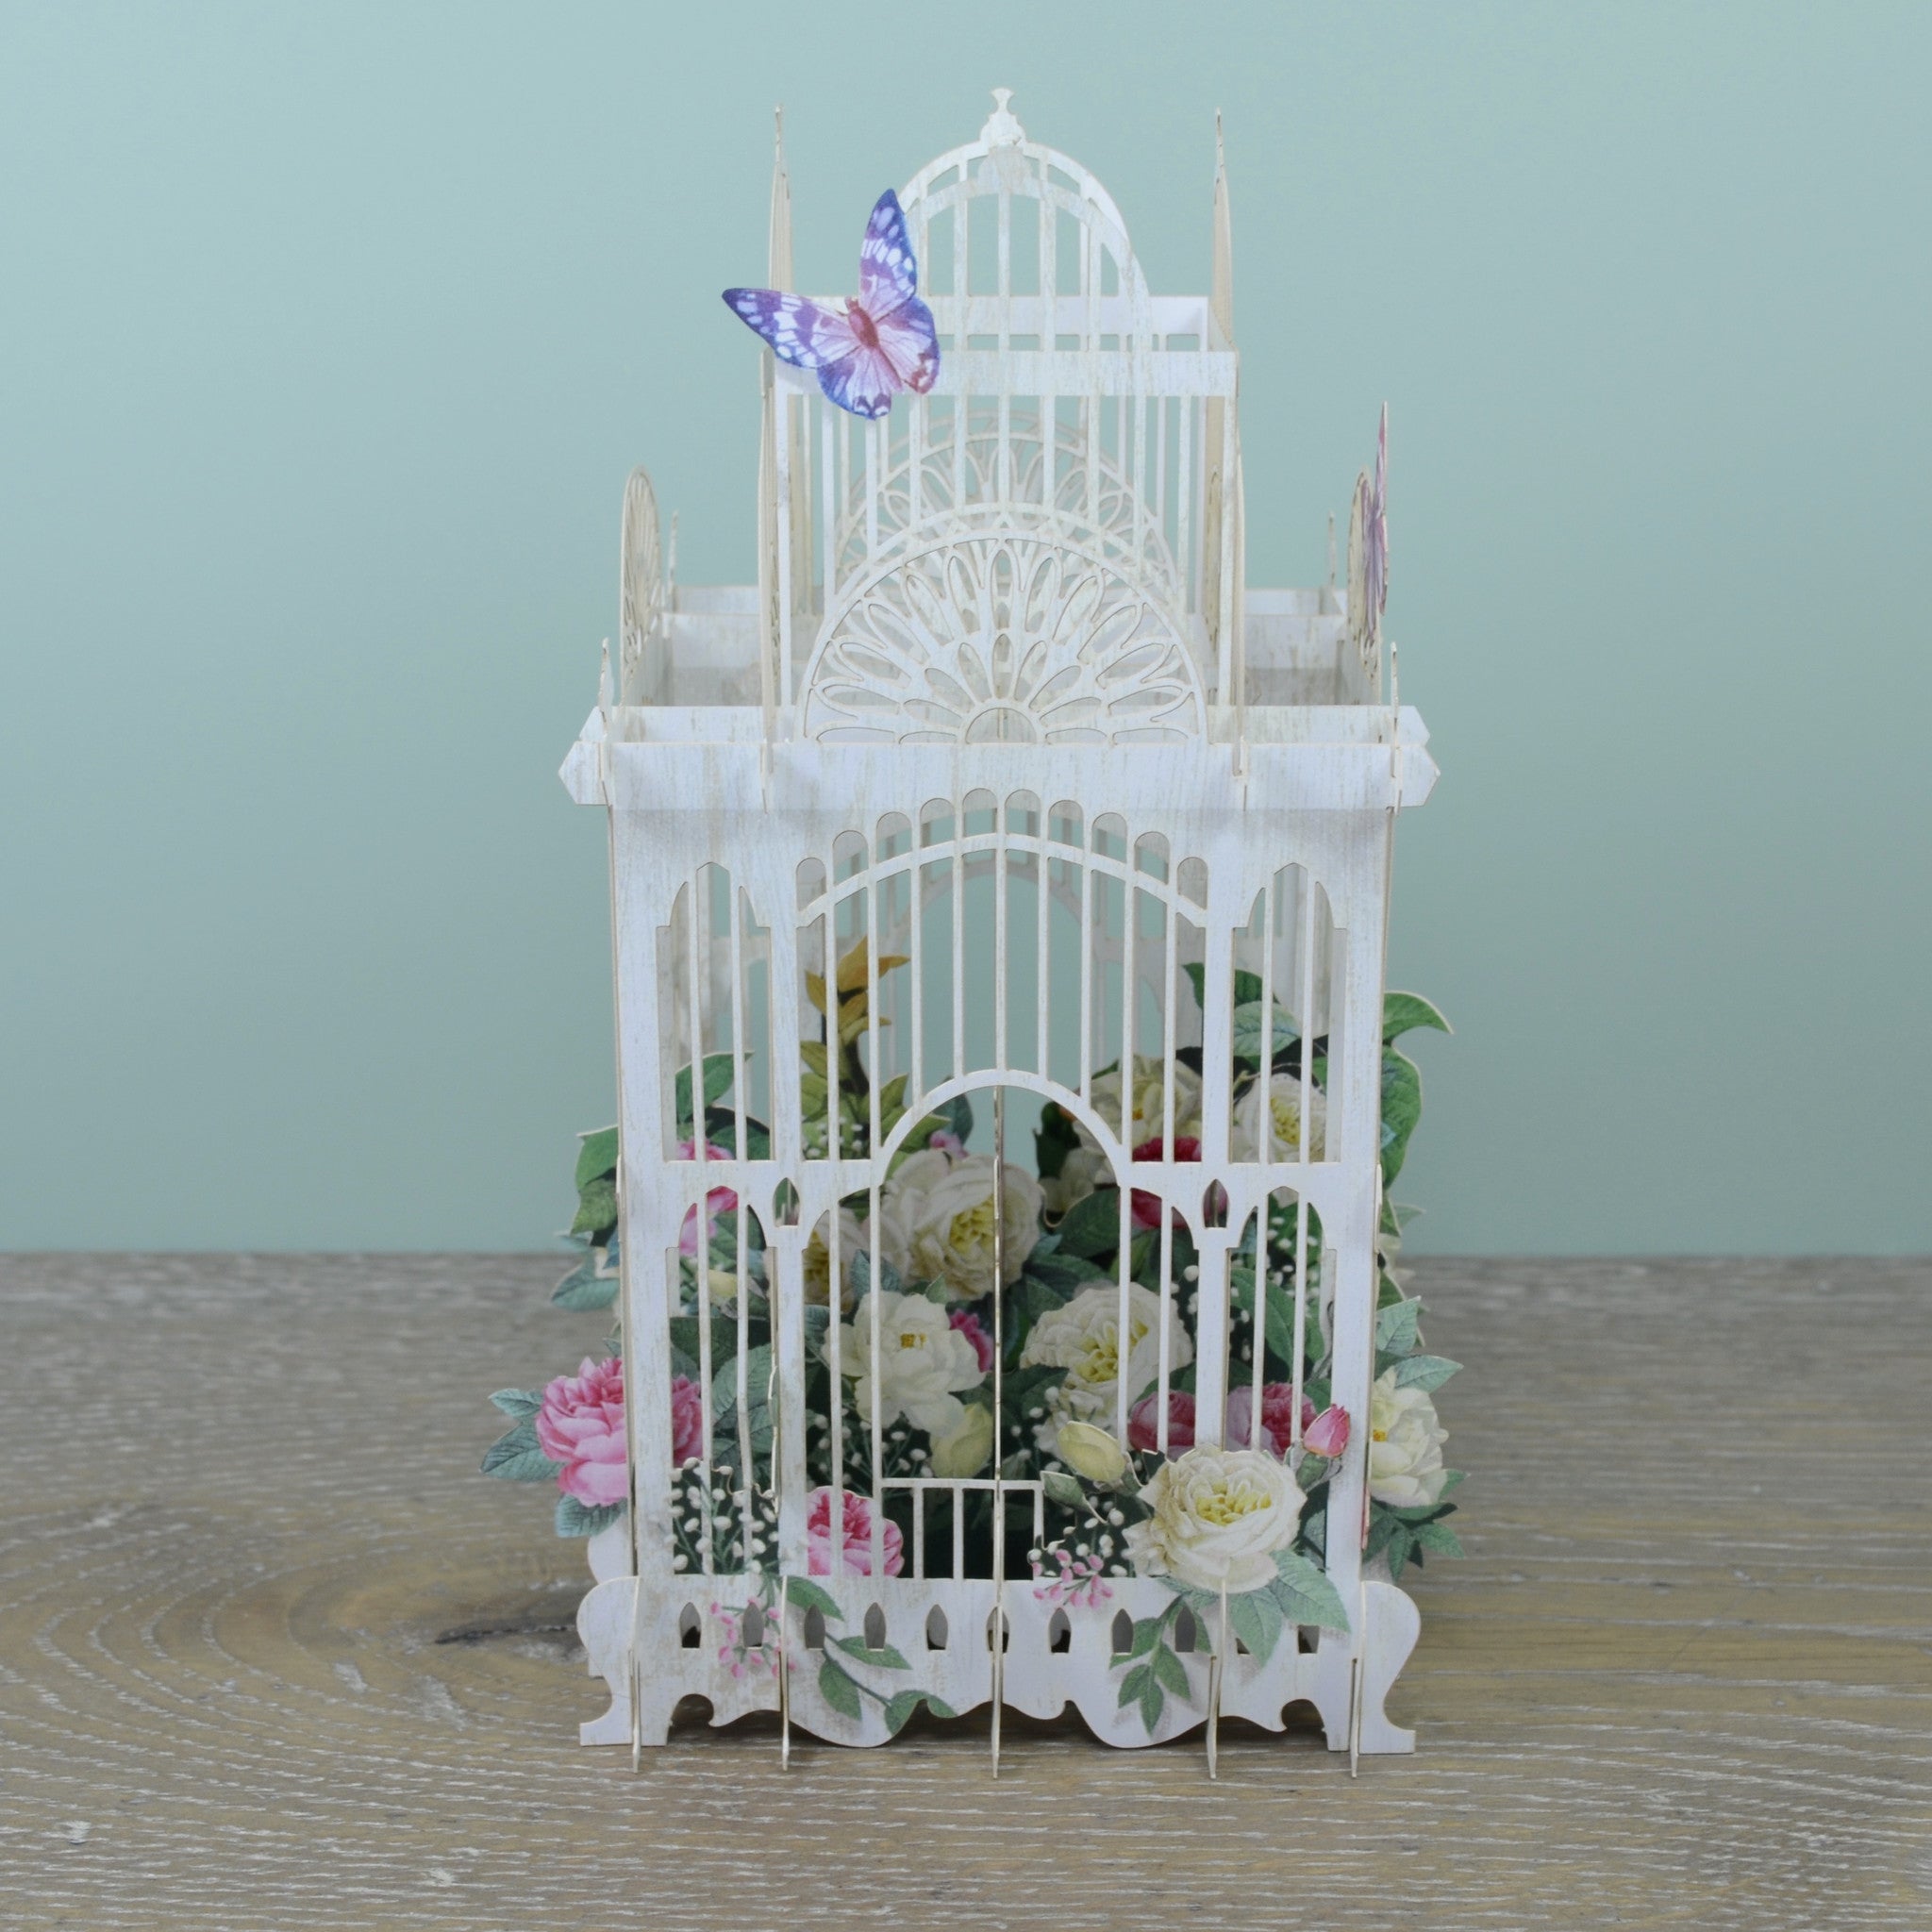 &quot;All Special Ages Flower Cage&quot; - 3D Pop Up Greetings Card